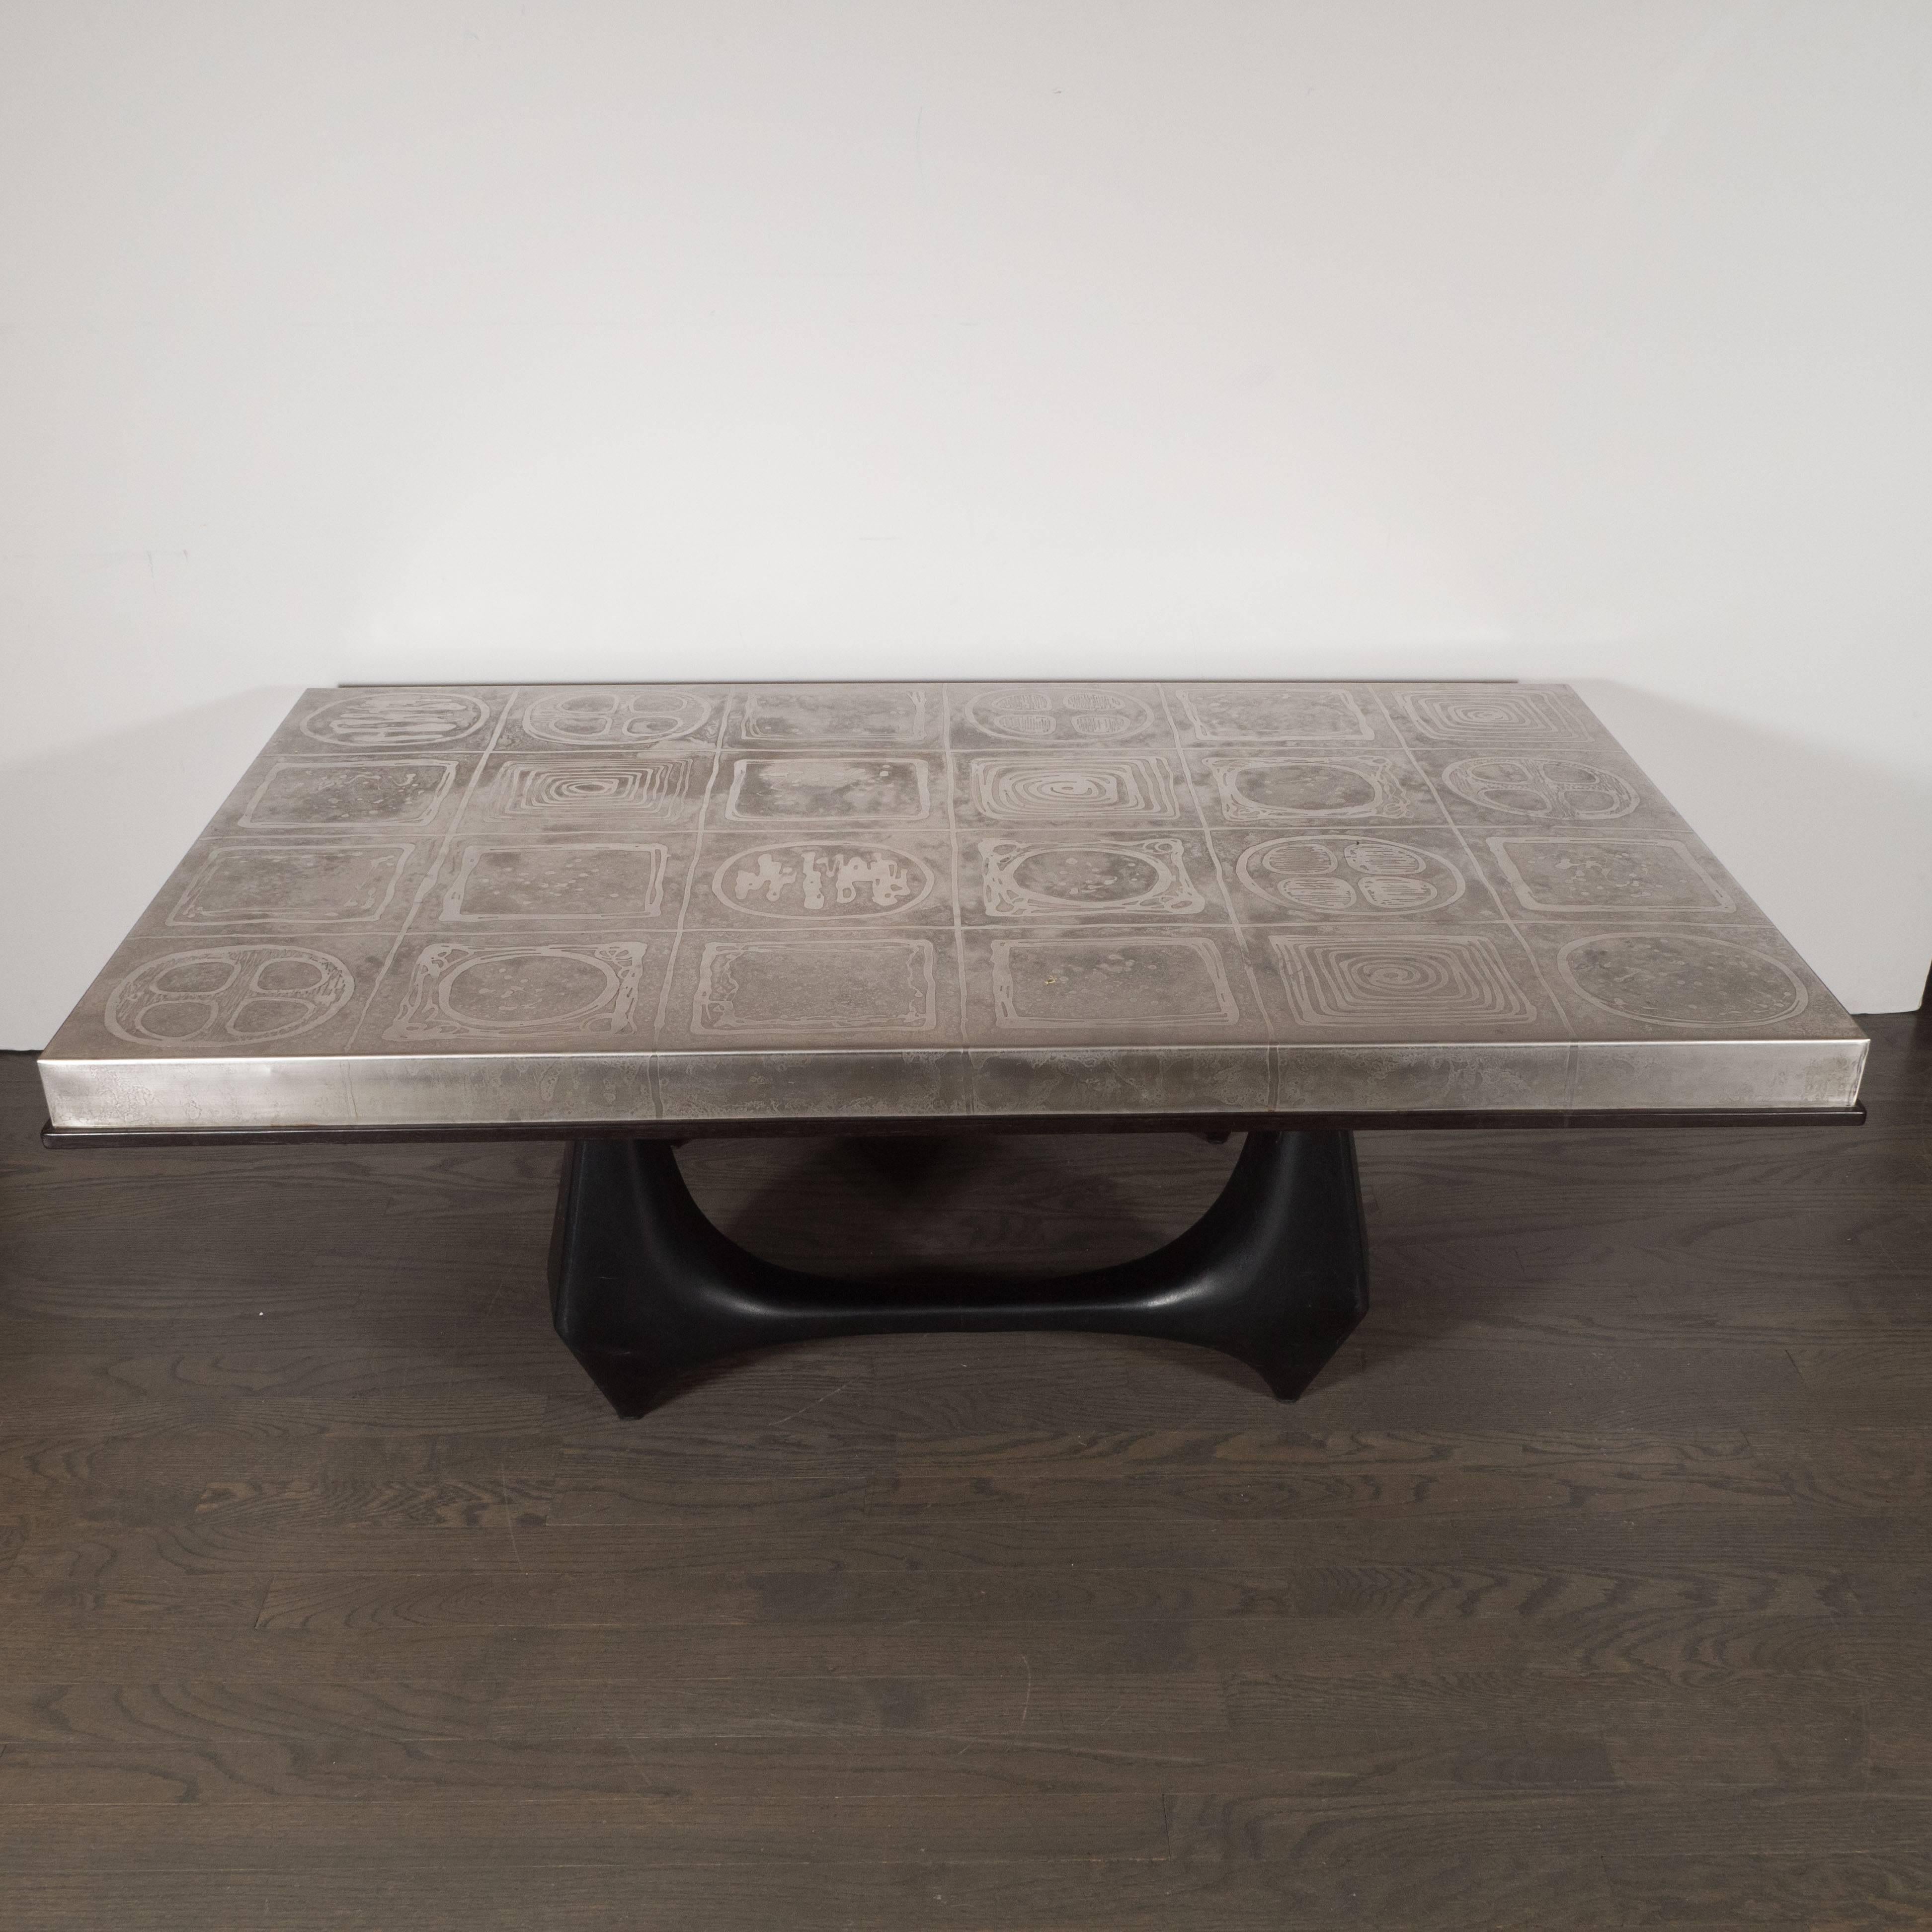 This exceptional Mid-Century modernist table features an array of organic forms acid etched into its aluminum top and circumscribed with an ebonized walnut border. The sculptural base has been forged from aluminum and coated in black enamel. This